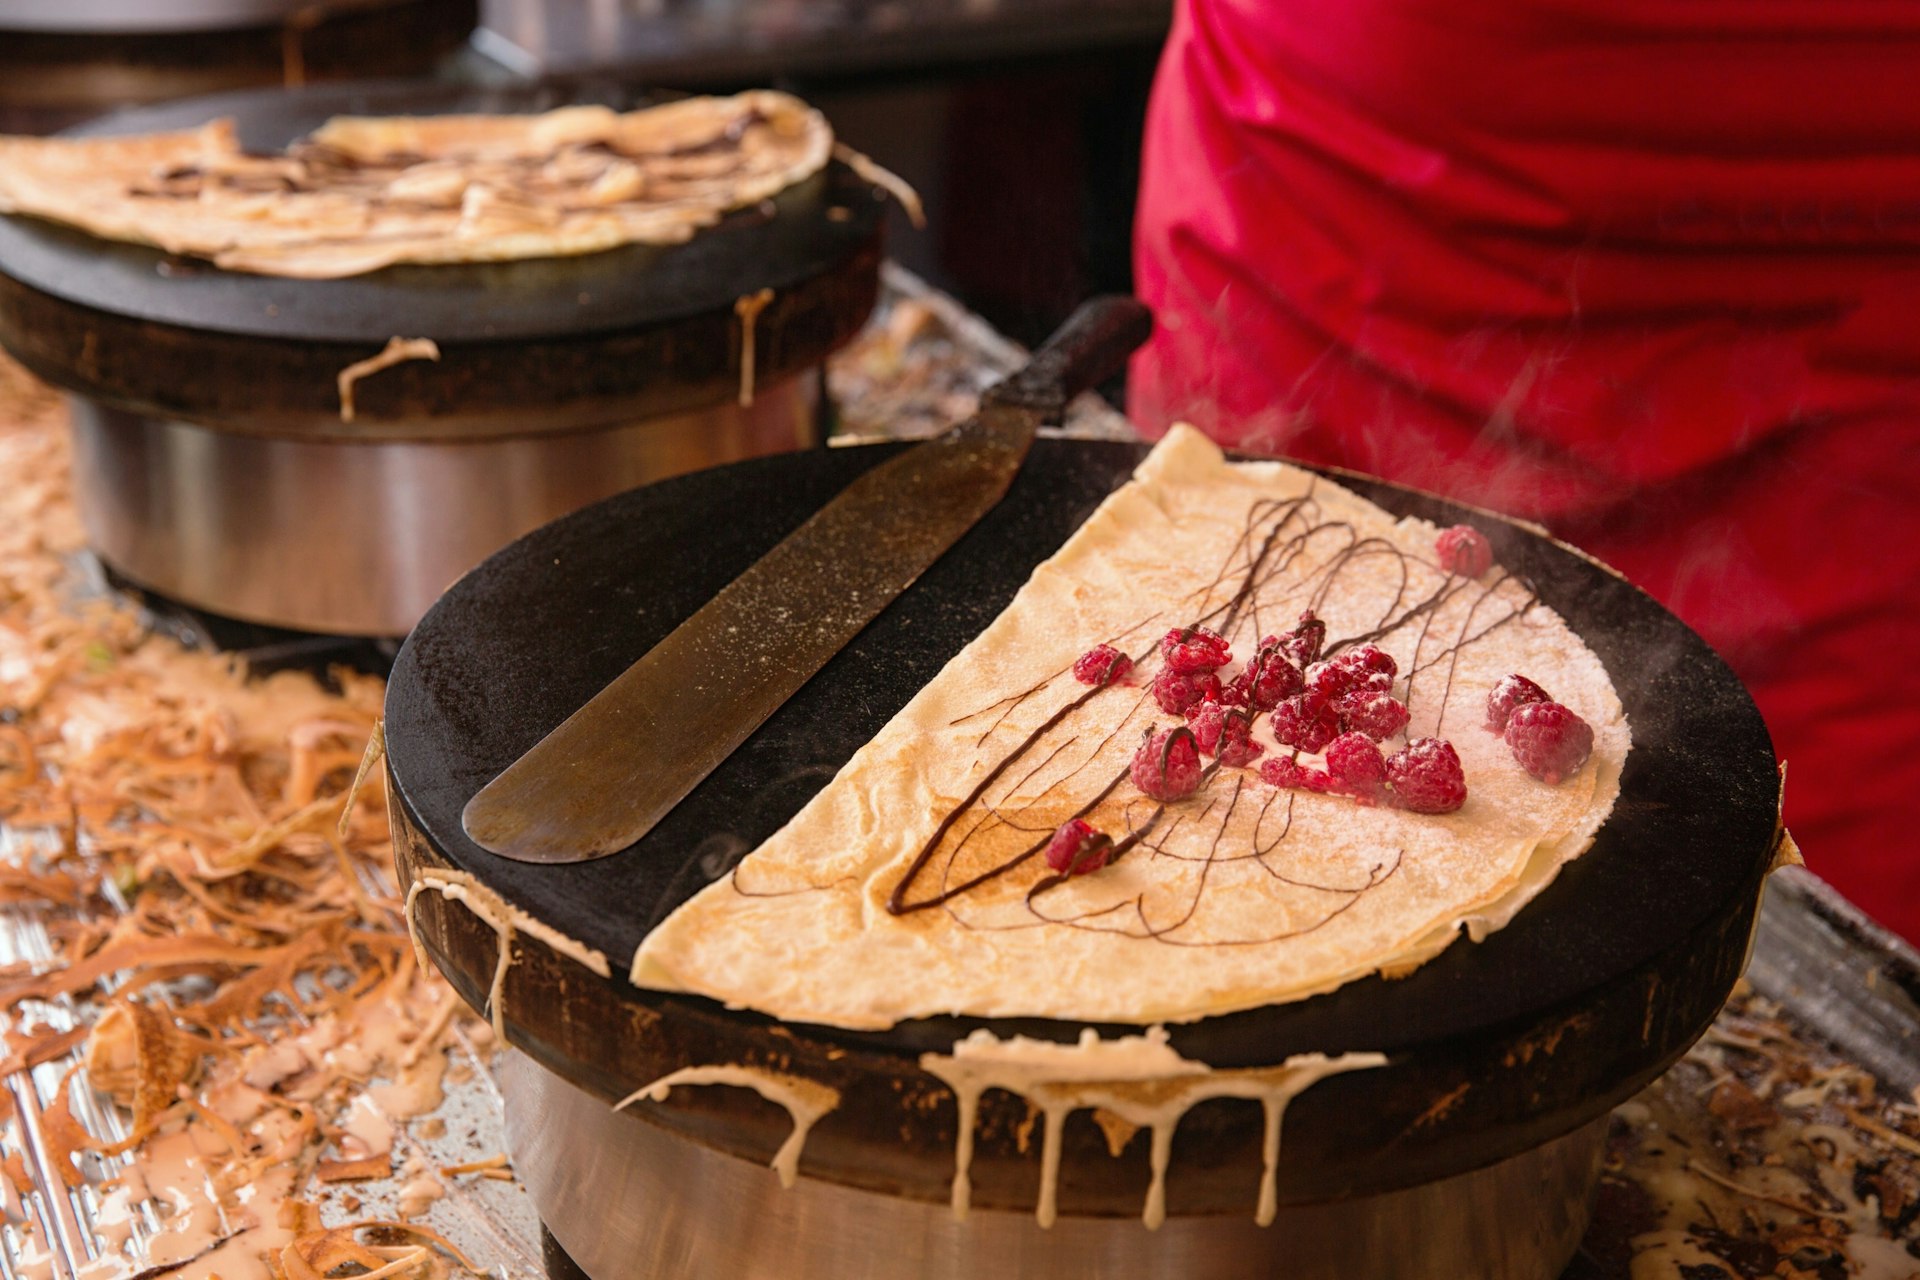 A crepe with raspberries being cooked on a hot plate by a street vendor in Paris, France.